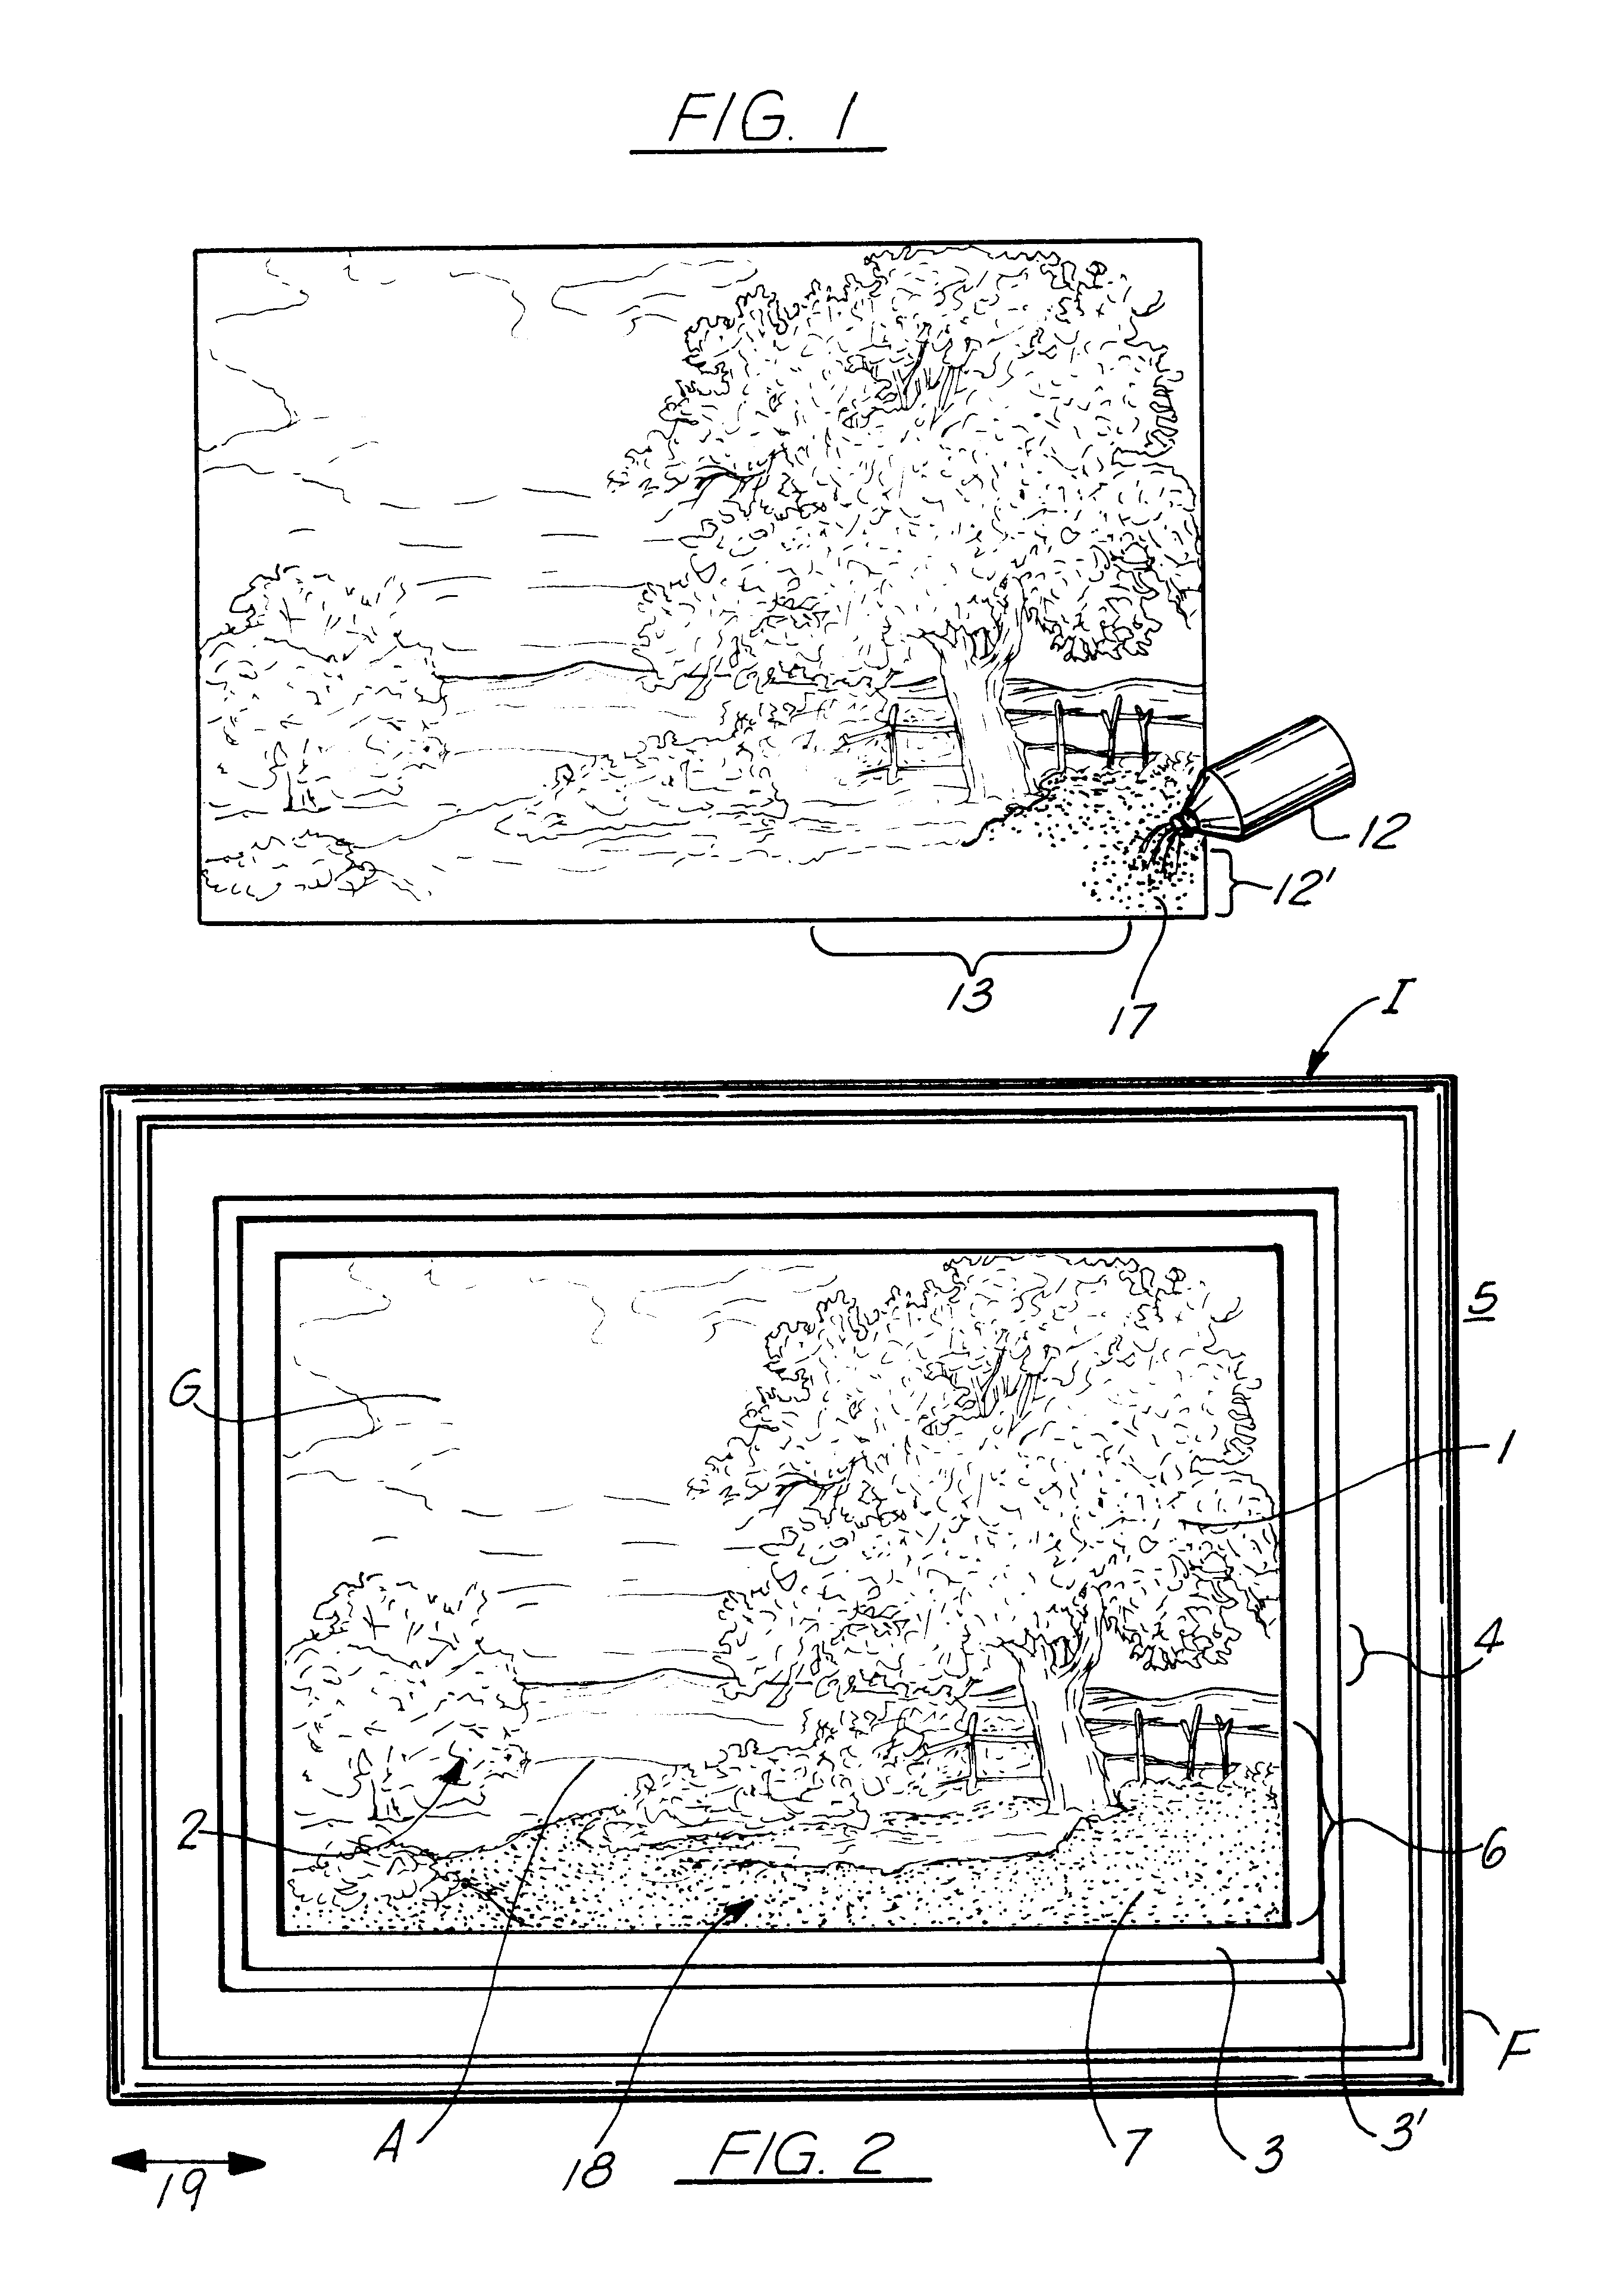 Cremated remains display upon a substrate system and method therefore